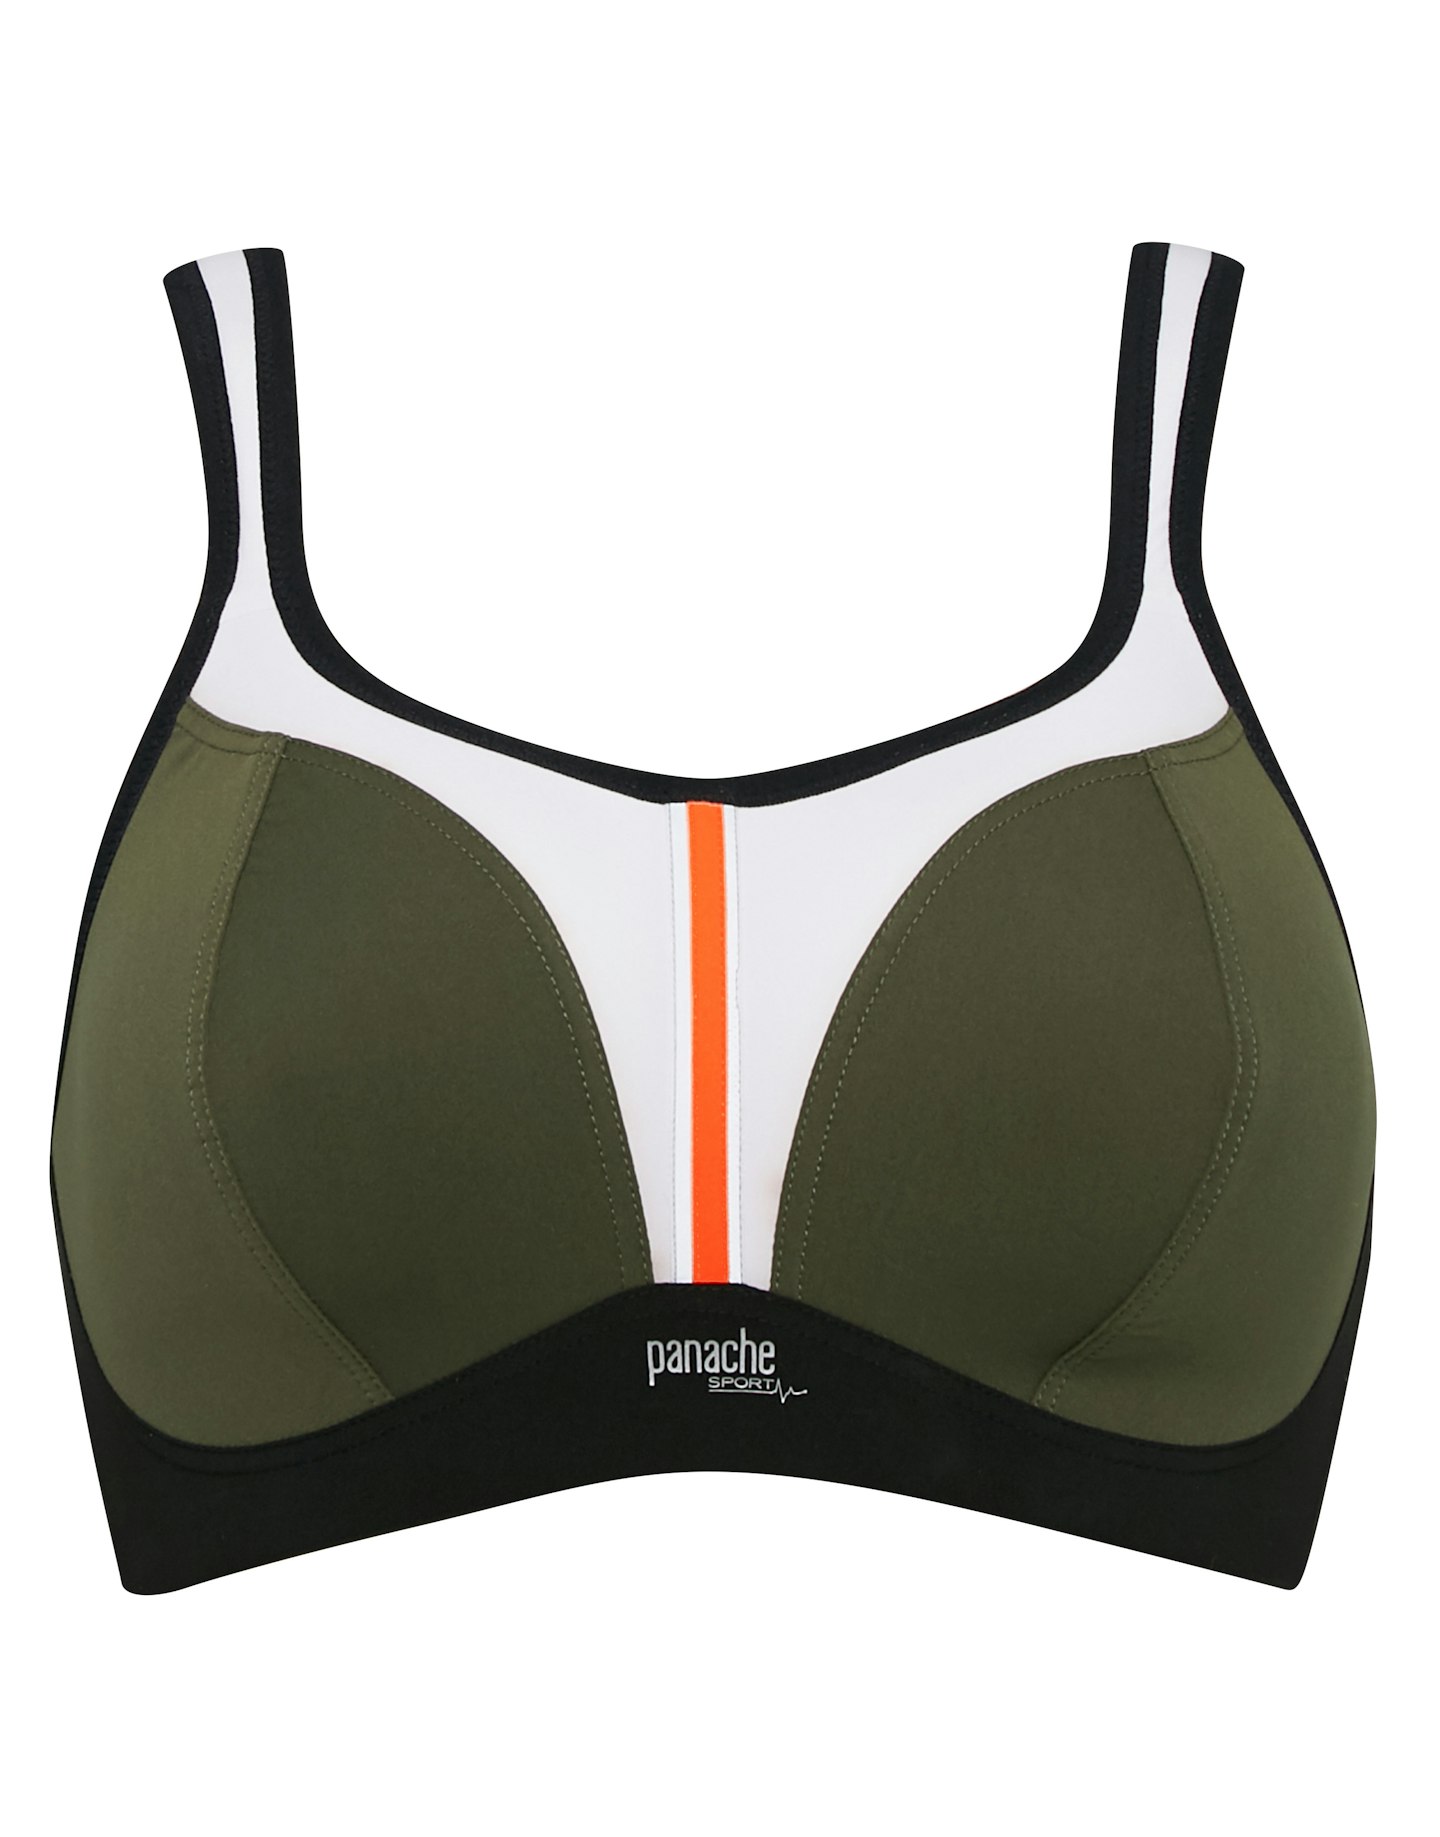 The Sports Moulded Non Wired Bra